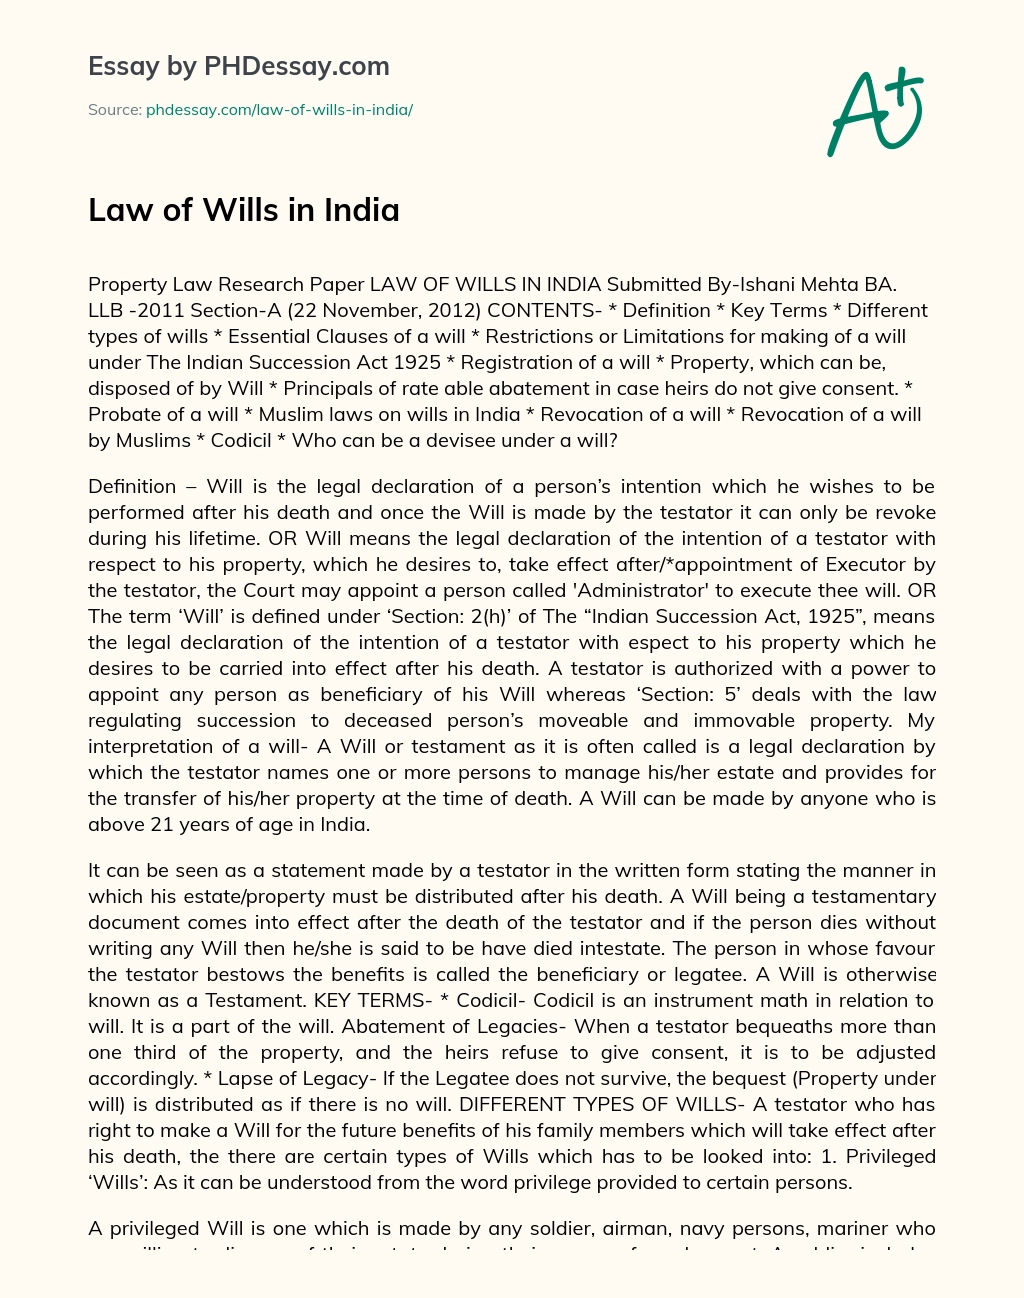 Law of Wills in India essay